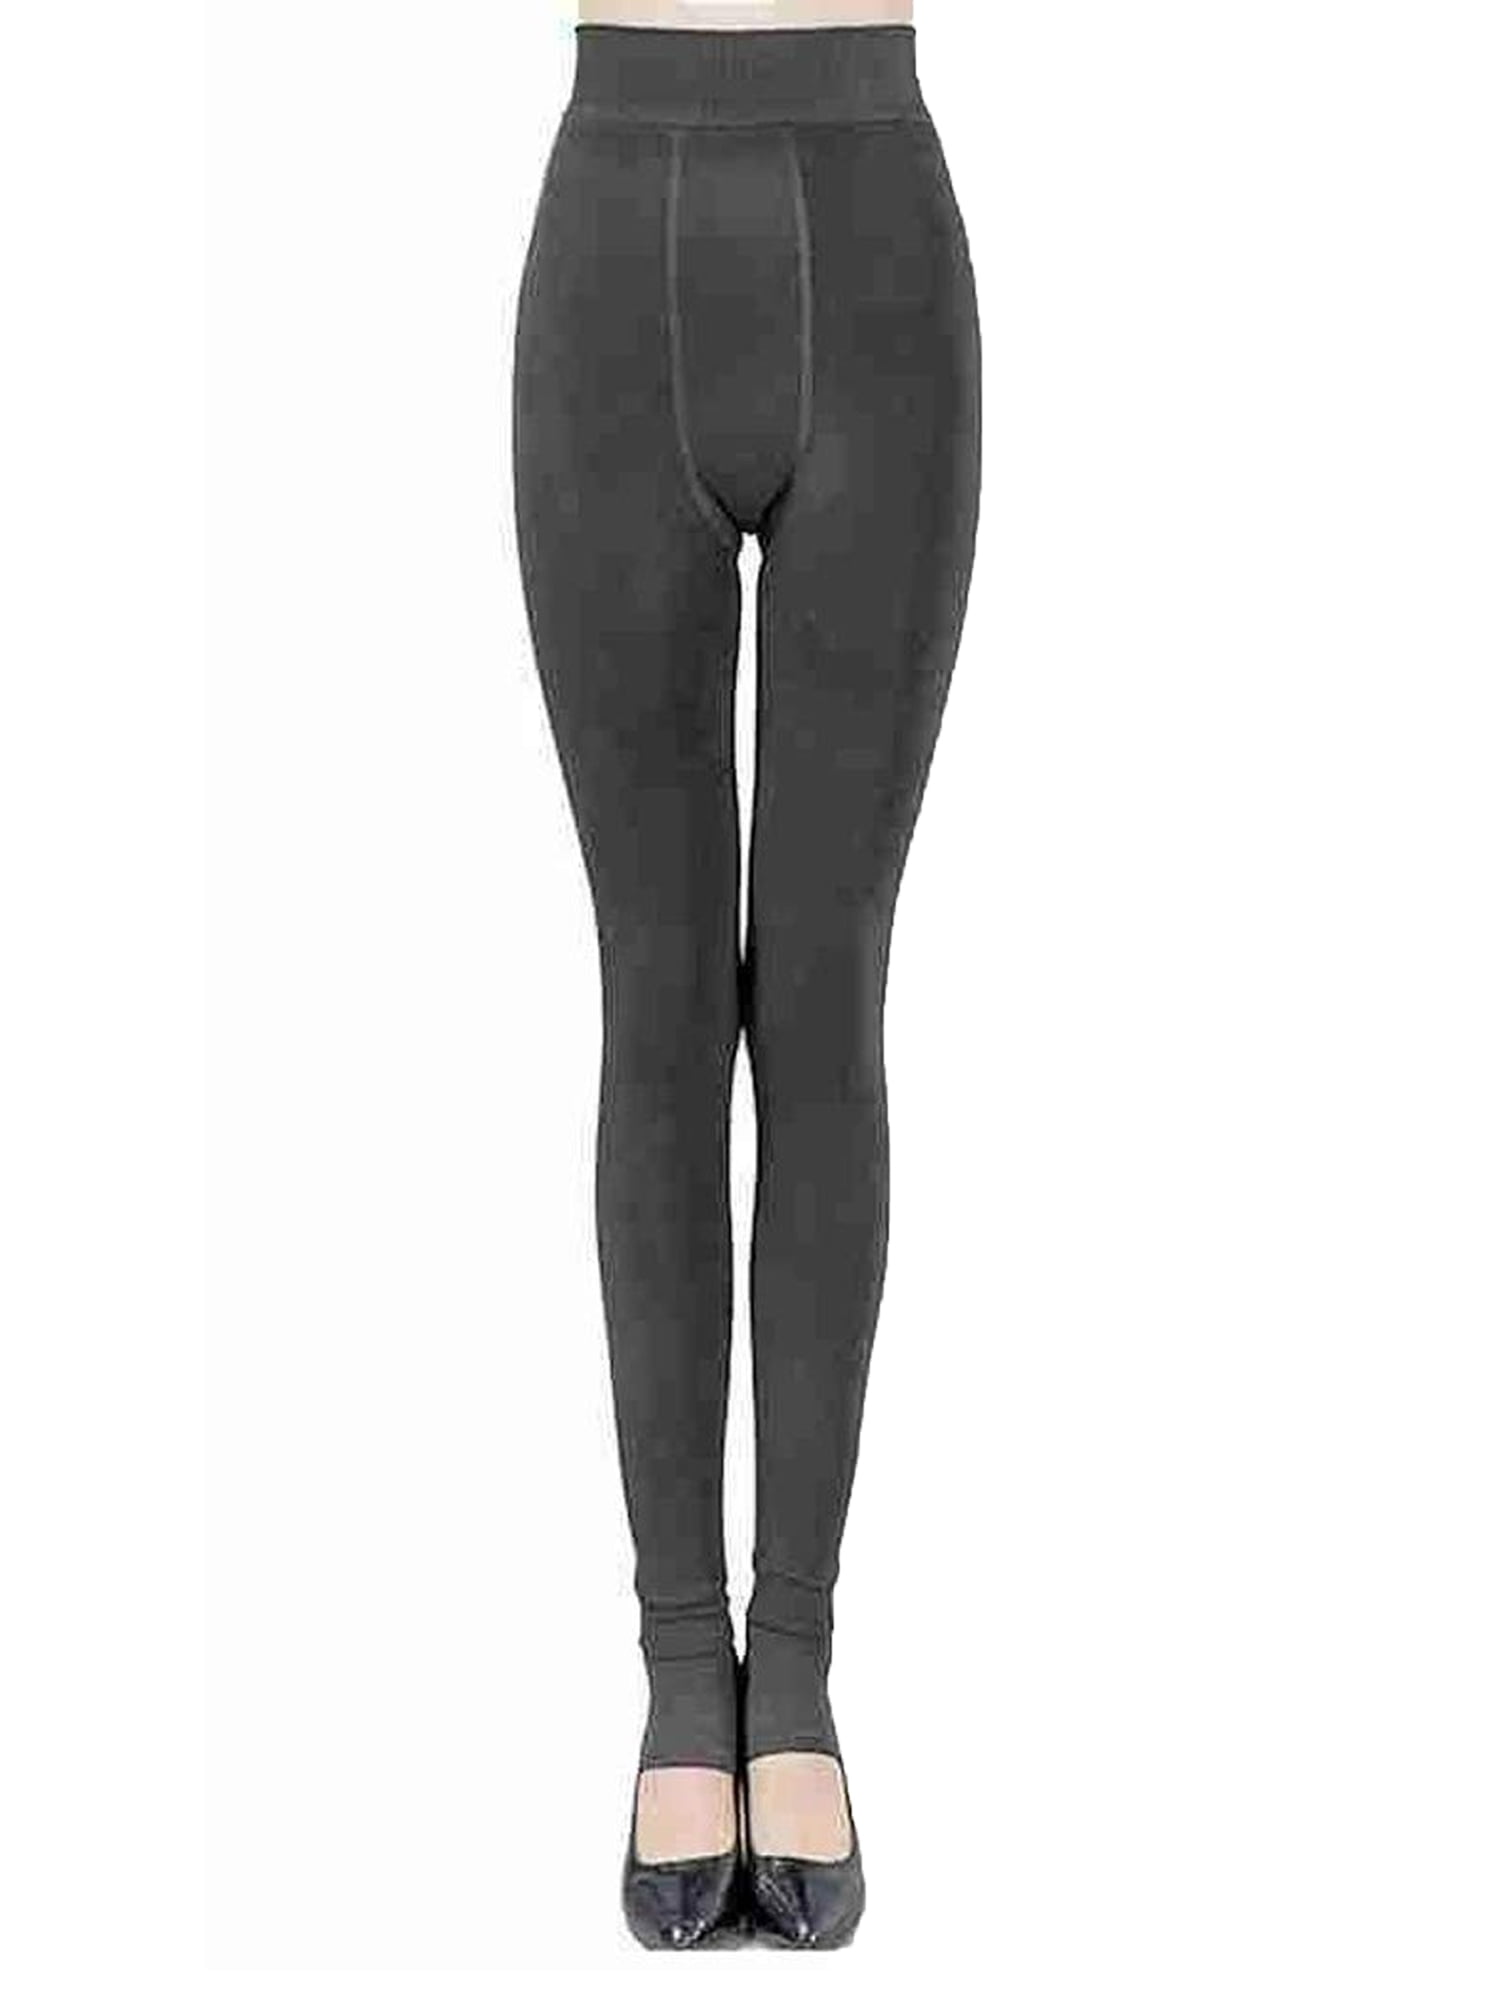 Women Winter Warm Thick Fleece Lined Thermal Stretchy Slim Soft Leggings Fall 